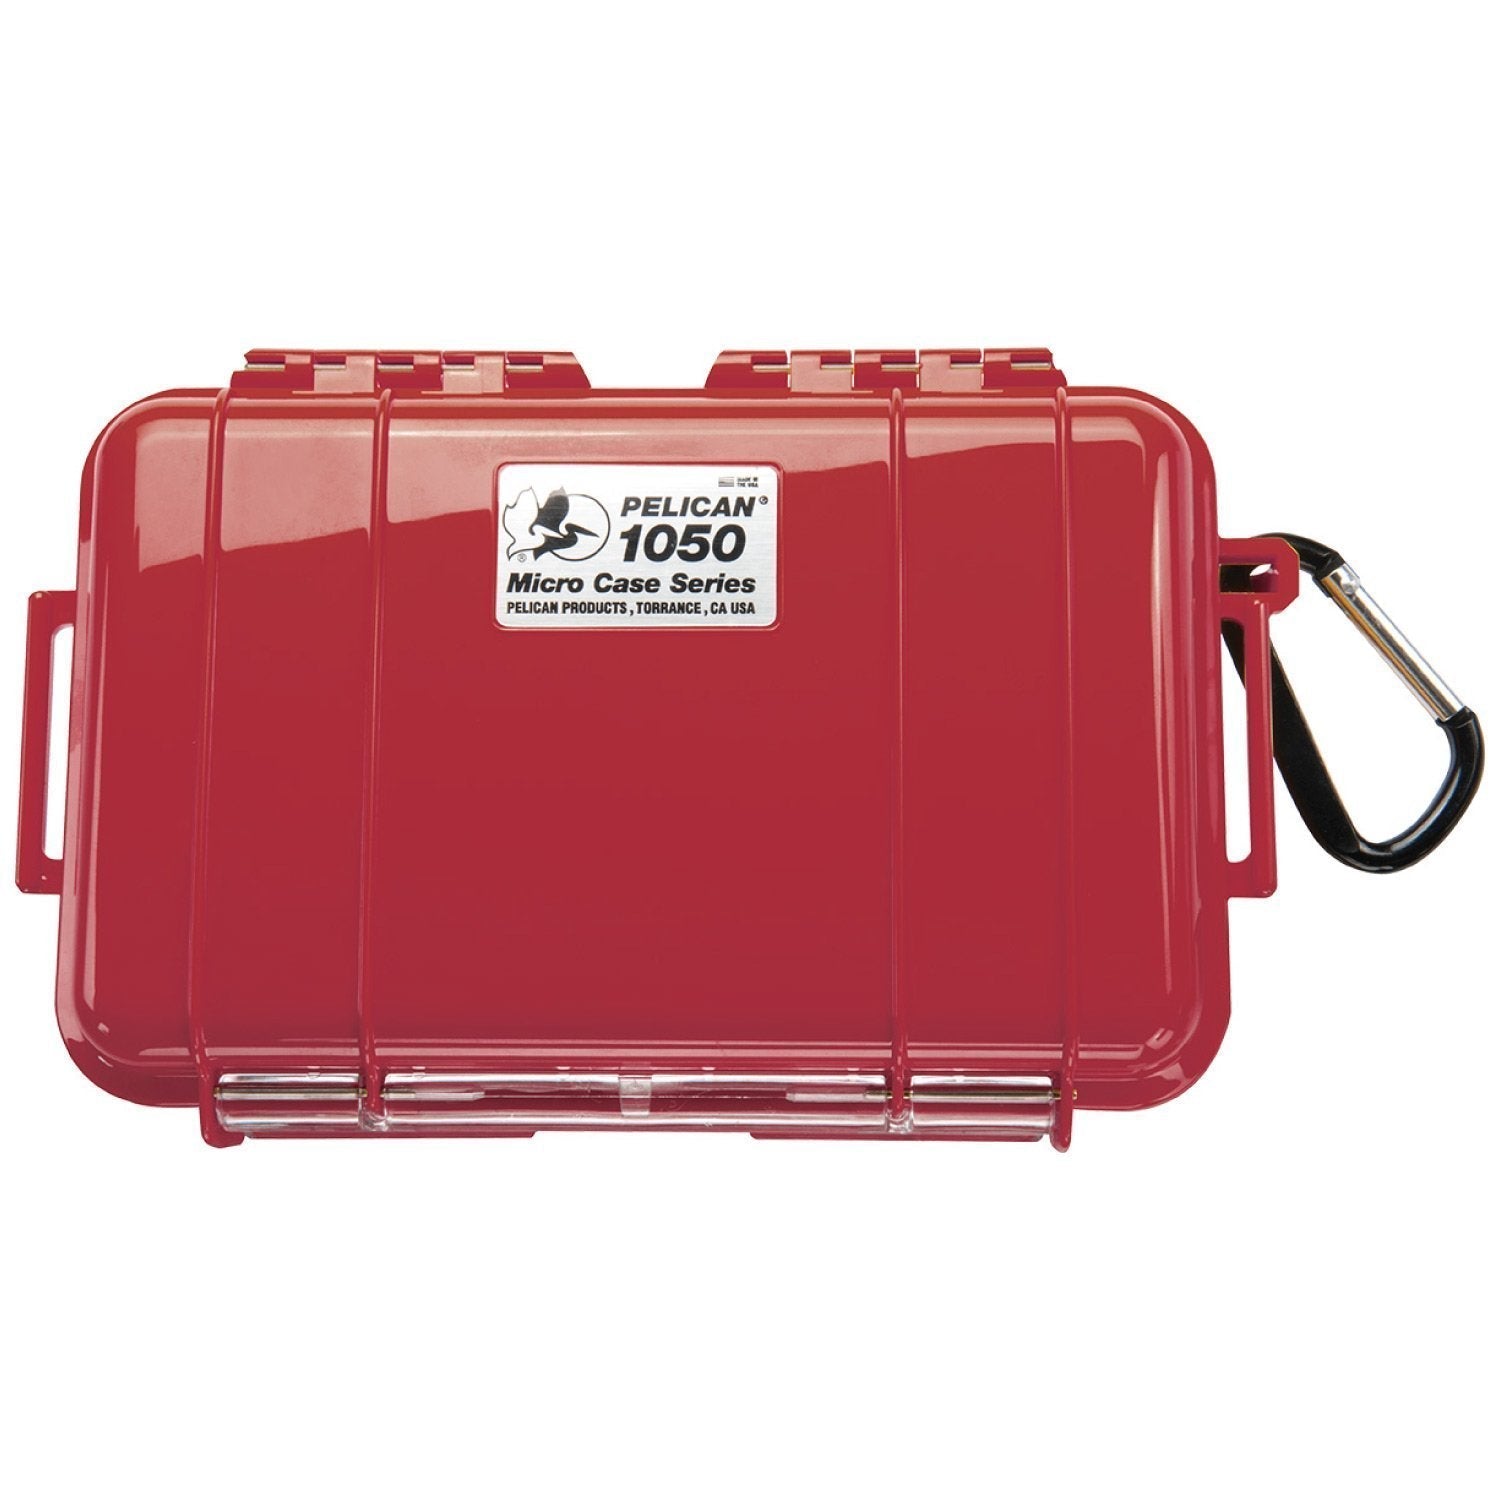 Pelican 1050 Micro Case Cases Pelican Products Red Shell with Black Liner Tactical Gear Supplier Tactical Distributors Australia